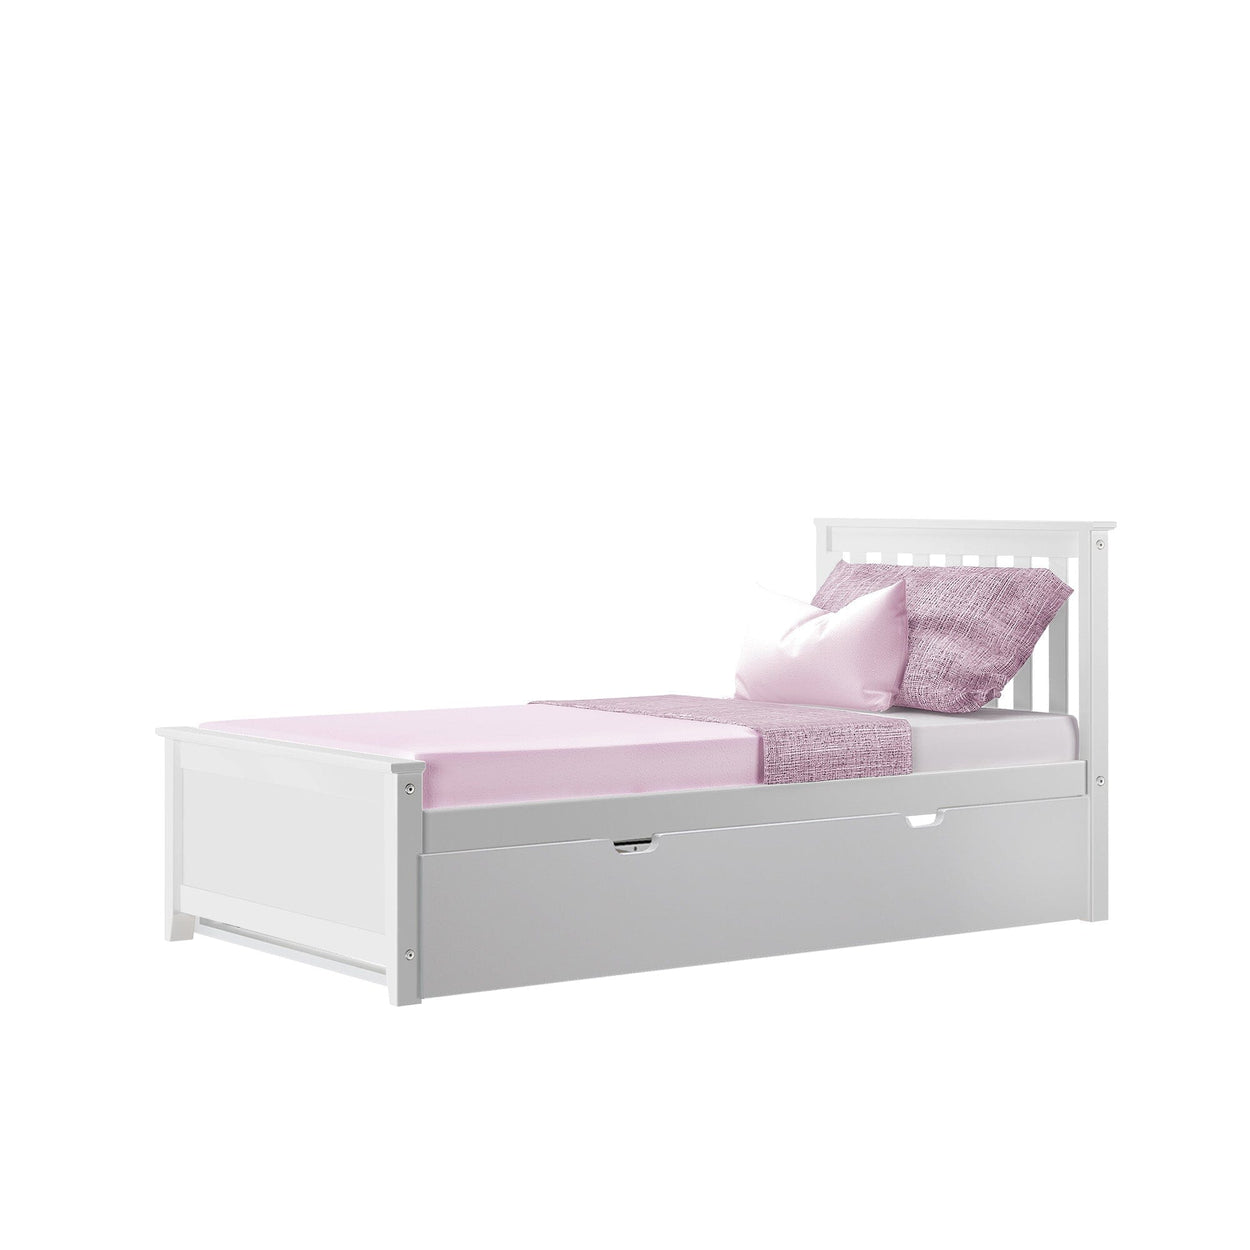 186210-002 : Kids Beds Twin-Size Bed with Trundle, White